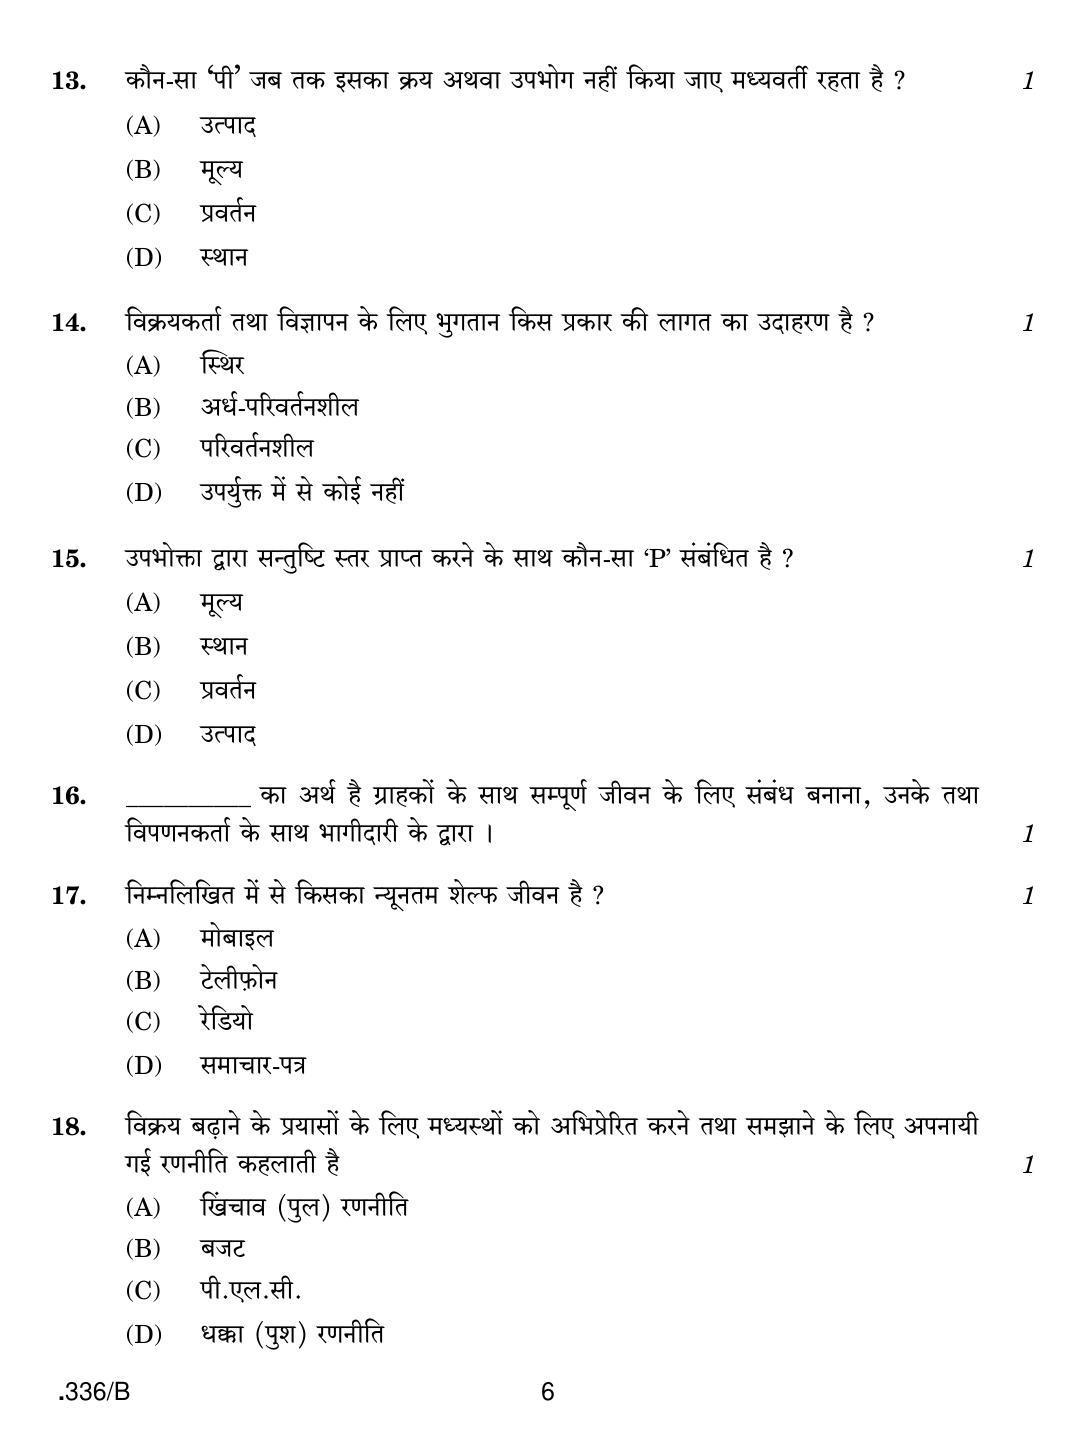 CBSE Class 12 Marketing 2020 Compartment Question Paper - Page 6